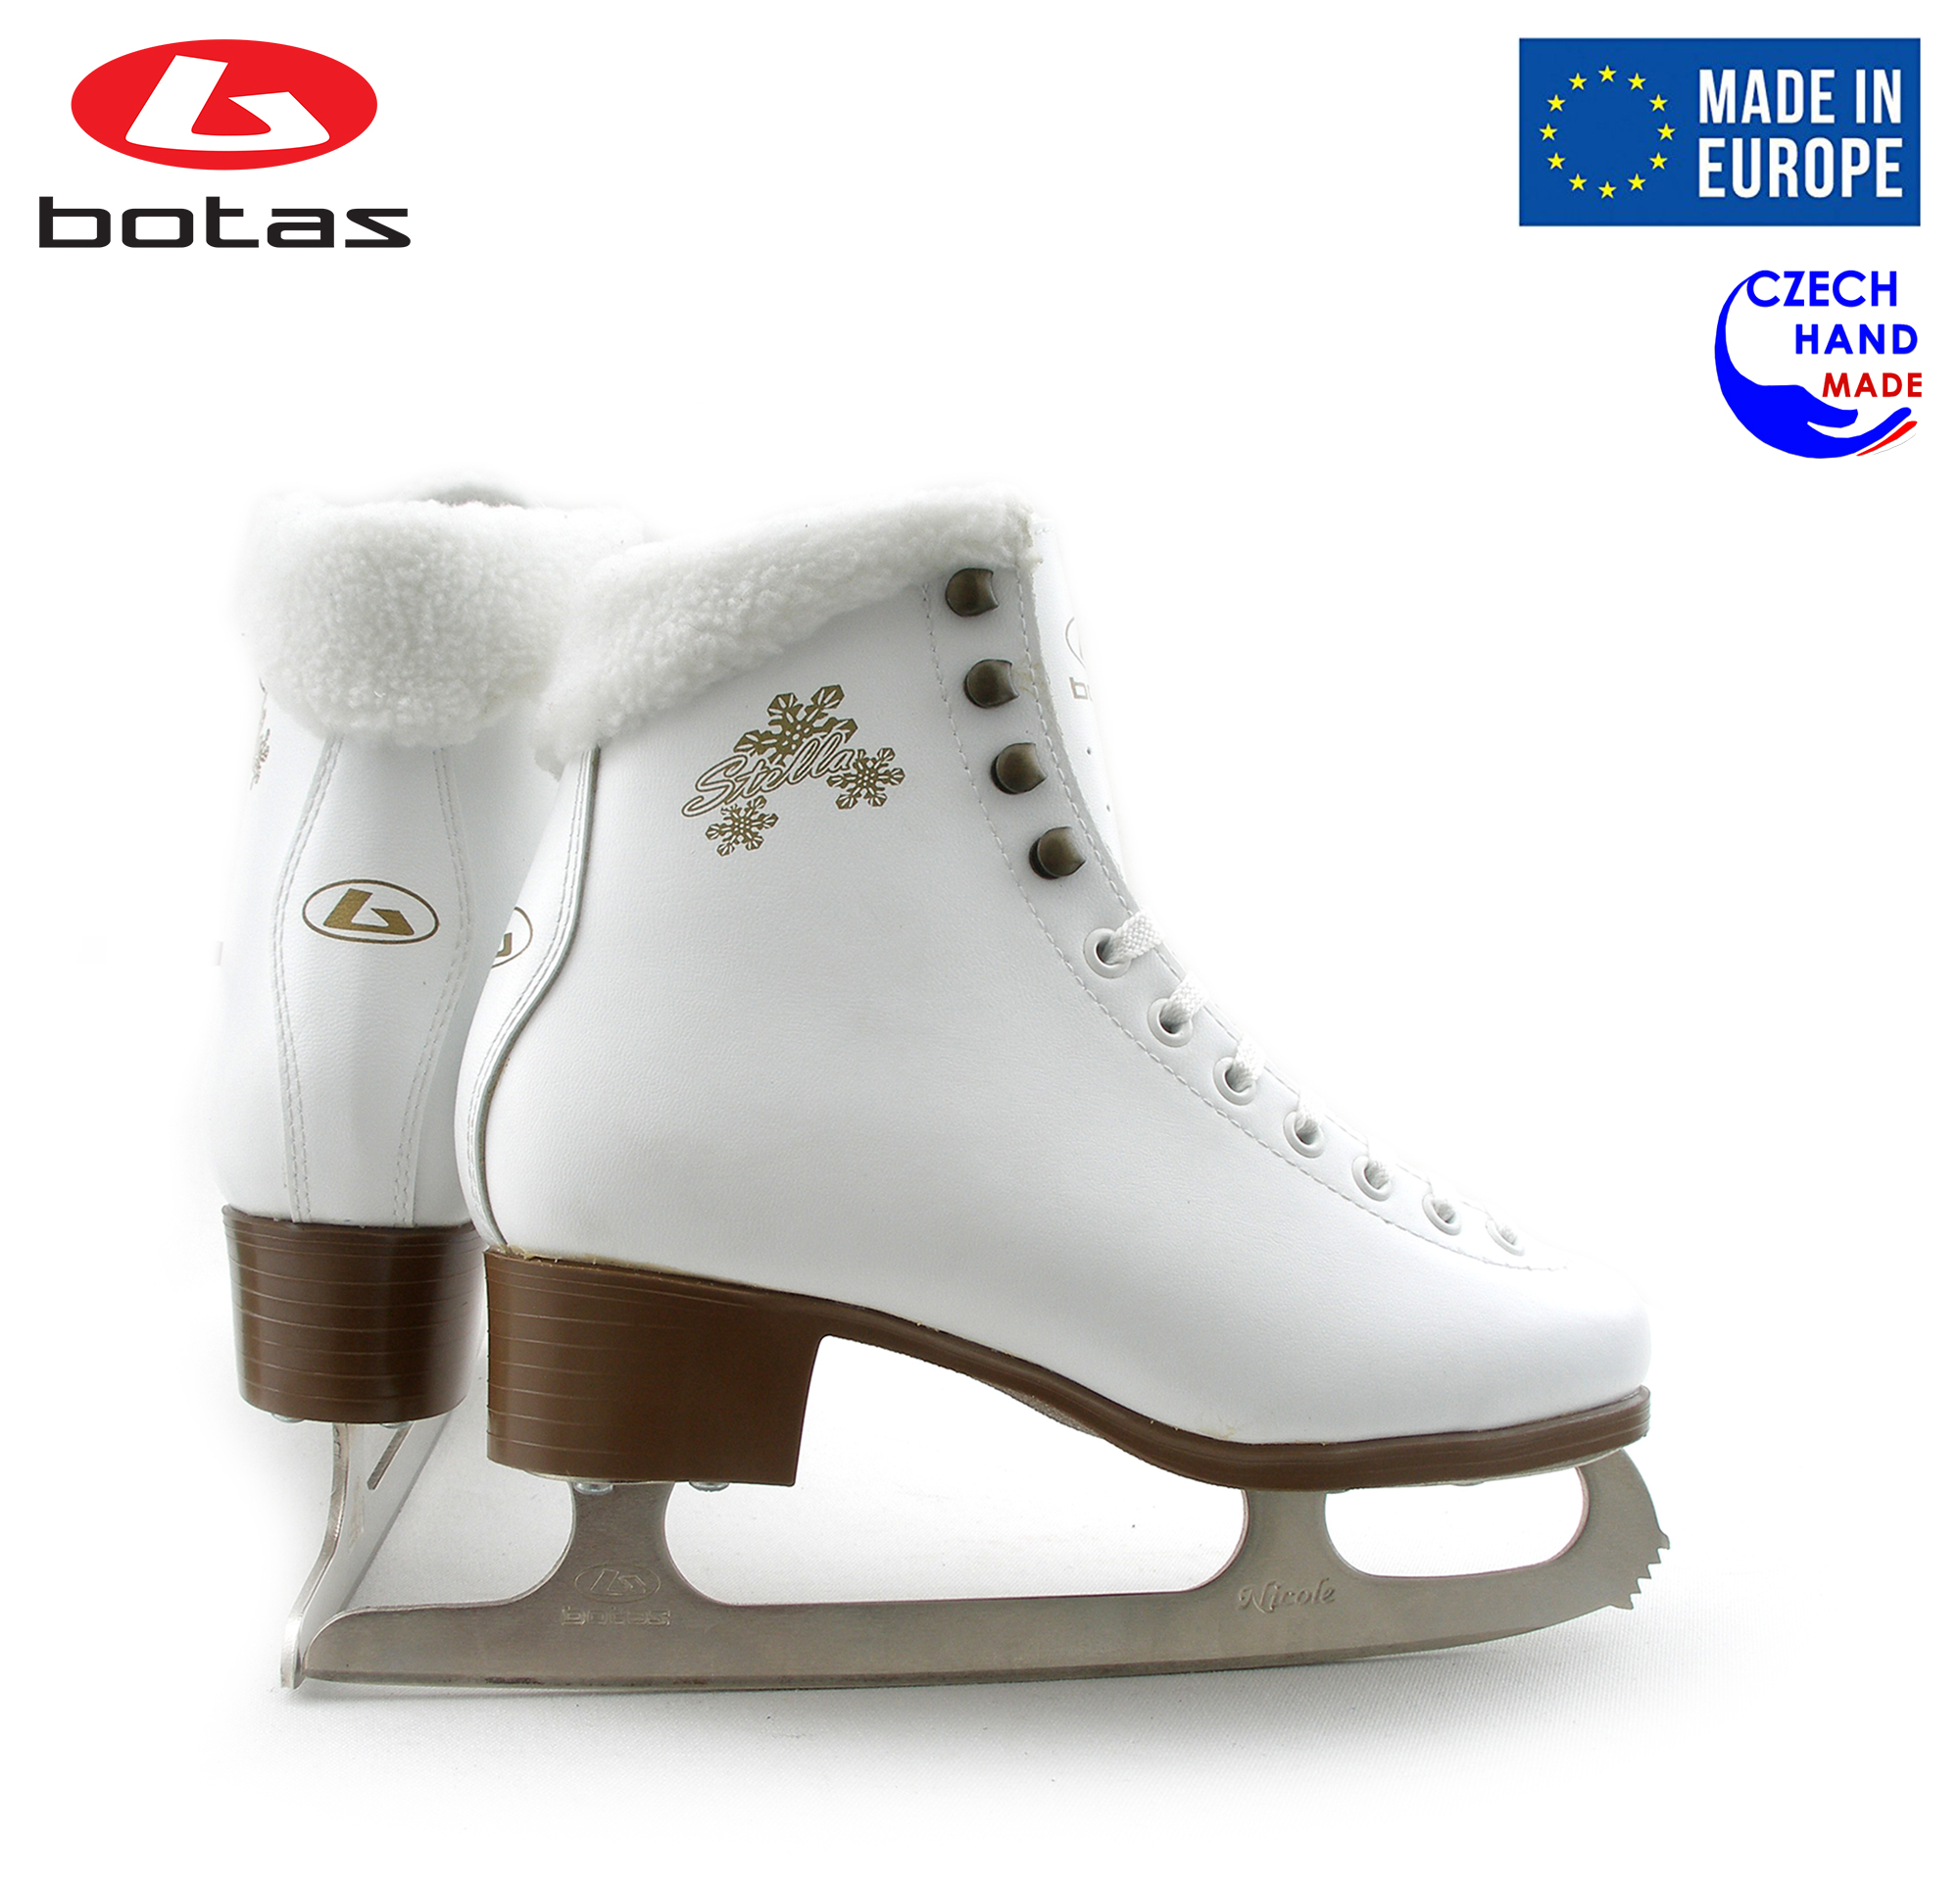 BOTAS - model: STELLA / Made in Europe (Czech Republic) / Innovated Elegant Figure Ice Skates for Girls, Kids / with Plush Collar / NICOLE blades / Color: White, Size: Kids 10 - image 5 of 6